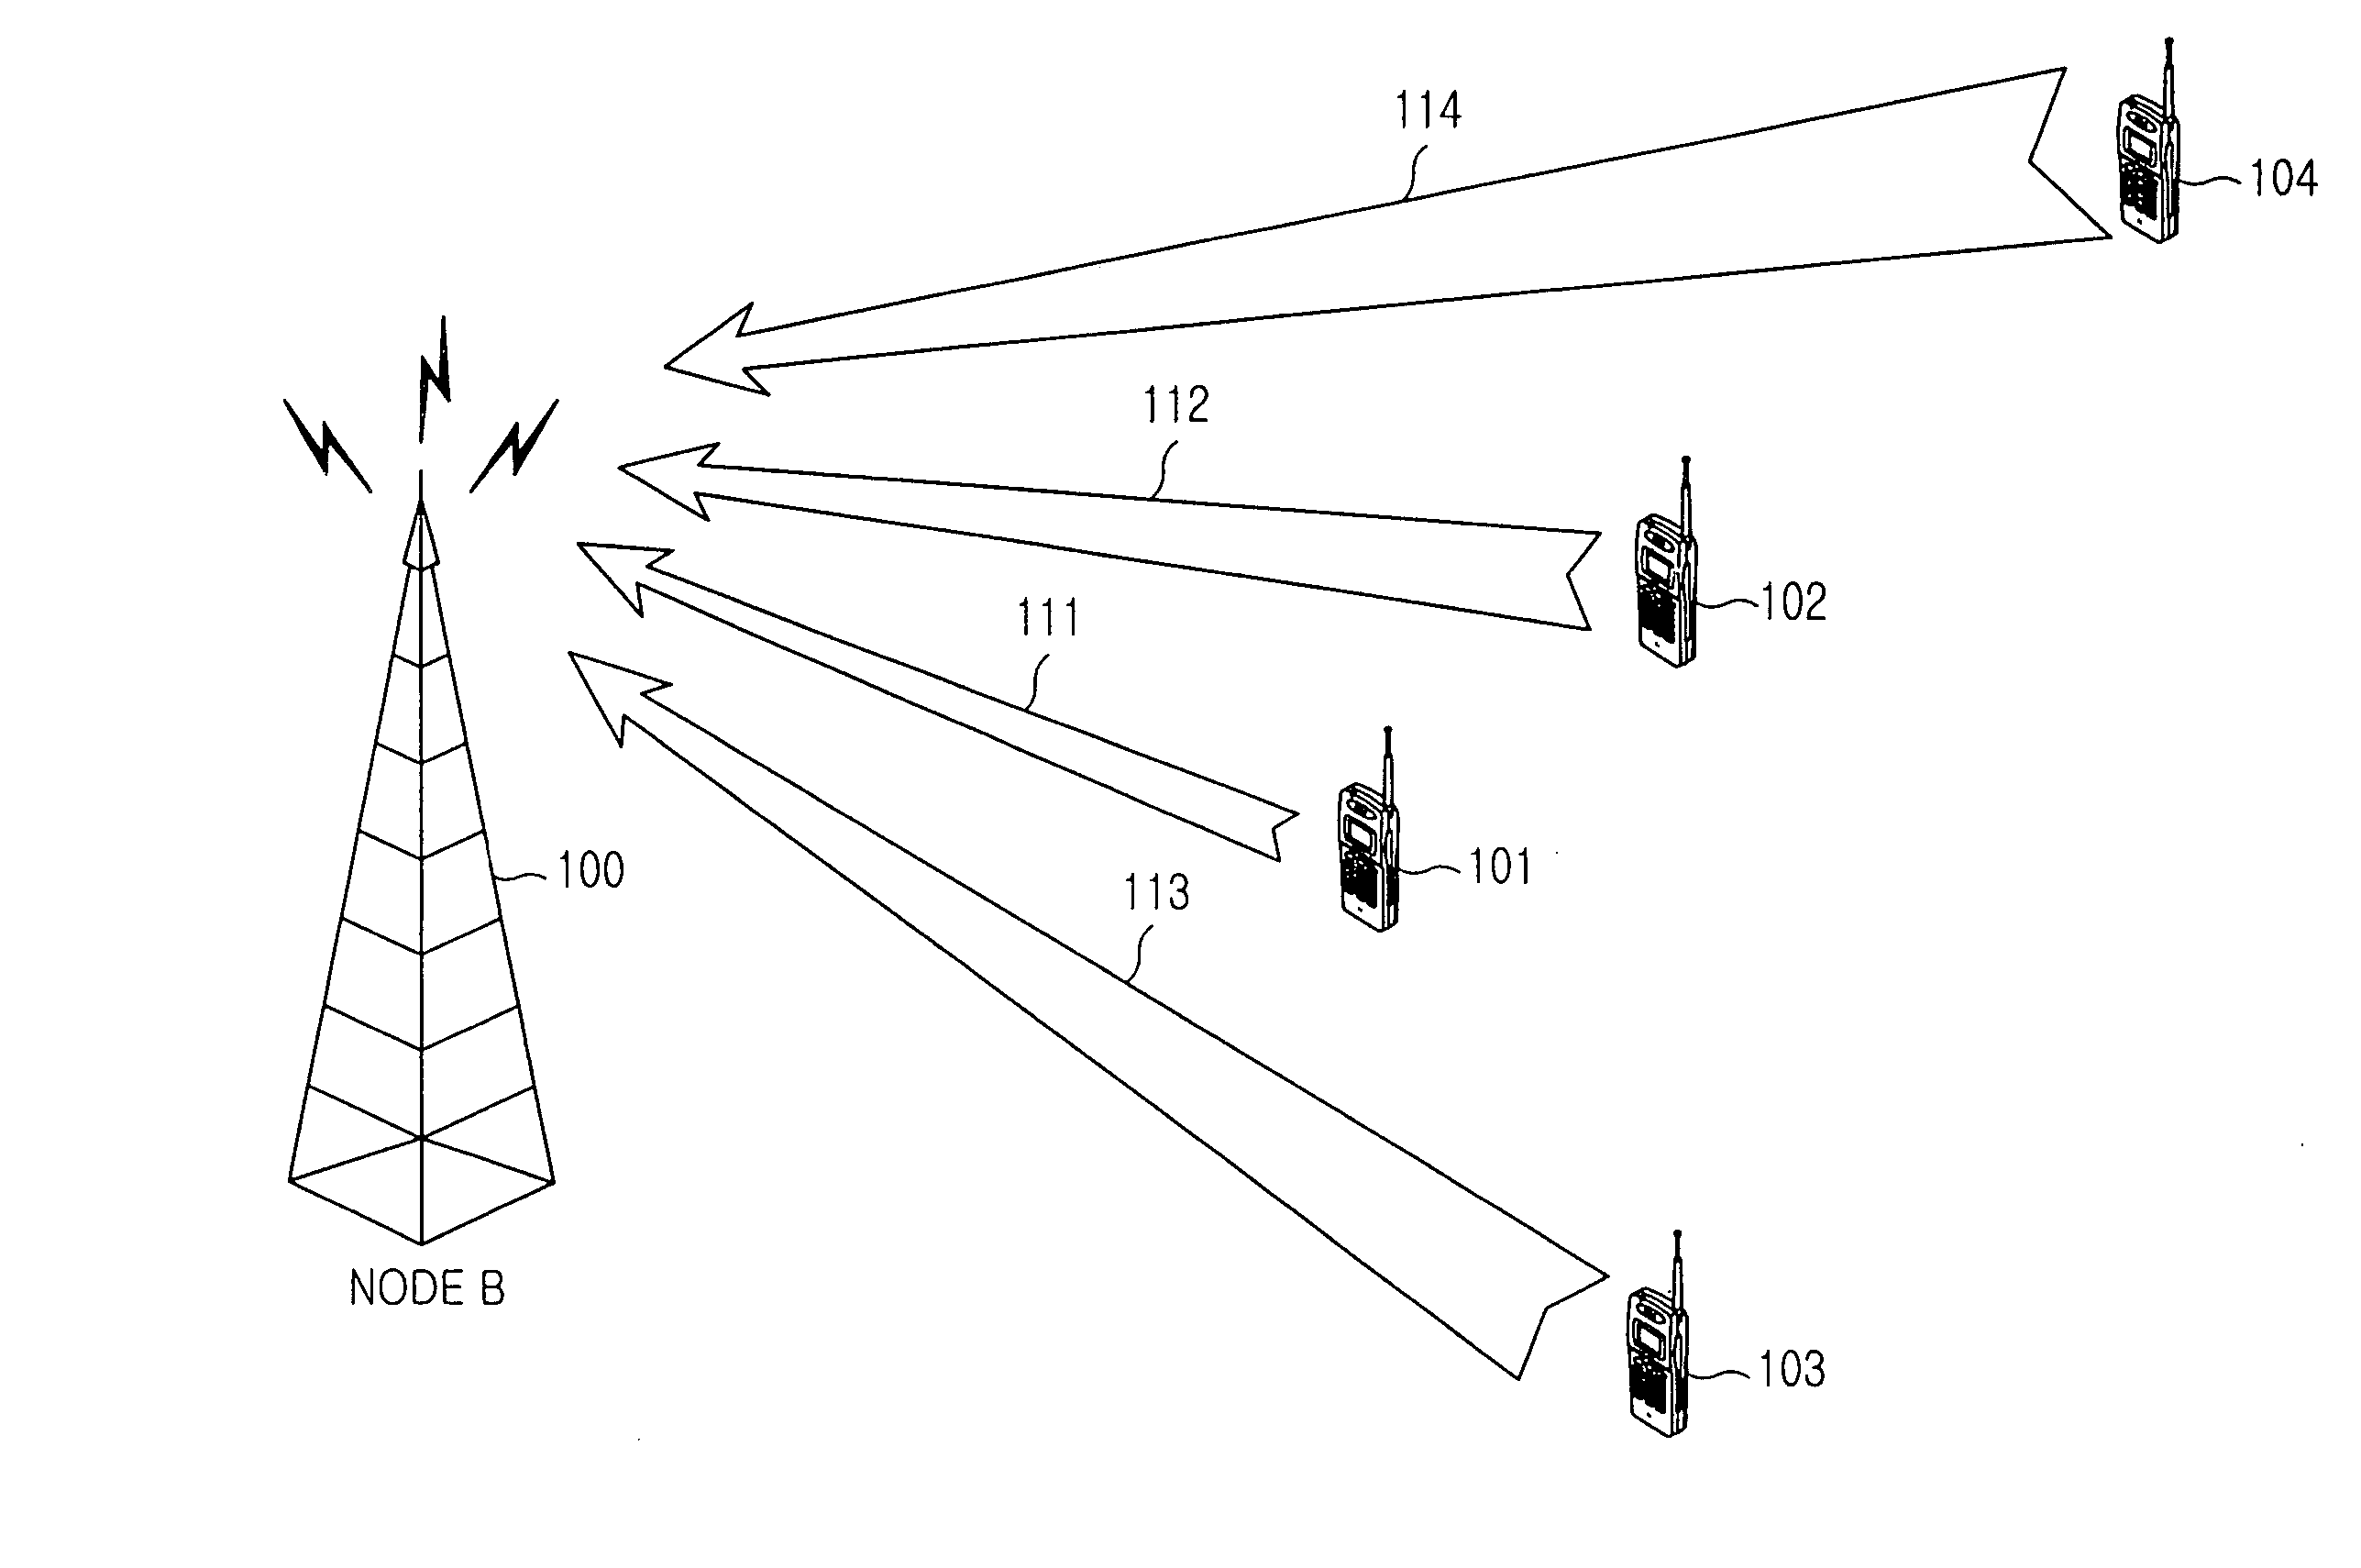 Method for configuring gain factors for uplink service in radio telecommunication system